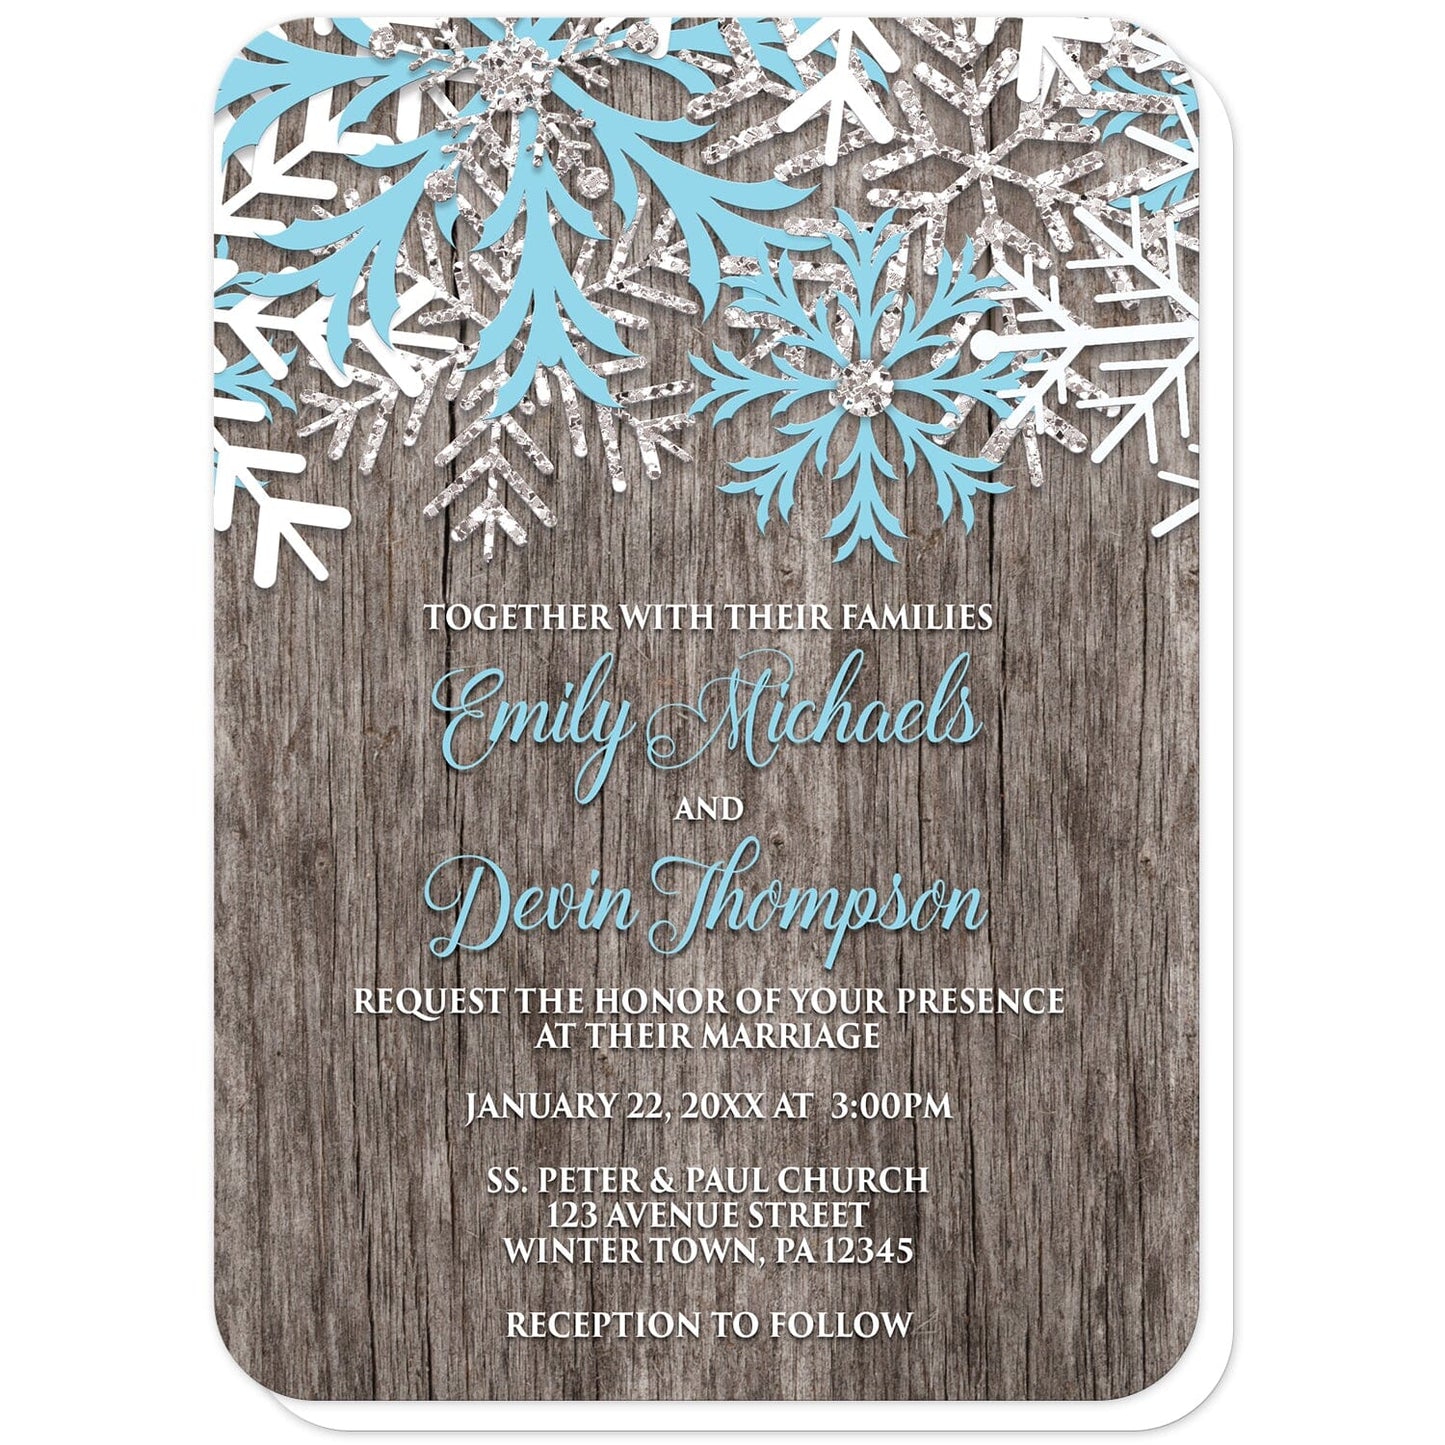 Rustic Winter Wood Blue Snowflake Wedding Invitations (with rounded corners) at Artistically Invited. Country-inspired rustic winter wood blue snowflake wedding invitations designed with light blue, white, and silver-colored glitter-illustrated snowflakes along the top over a rustic wood pattern illustration. Your personalized marriage celebration details are custom printed in light blue and white over the wood background below the snowflakes.